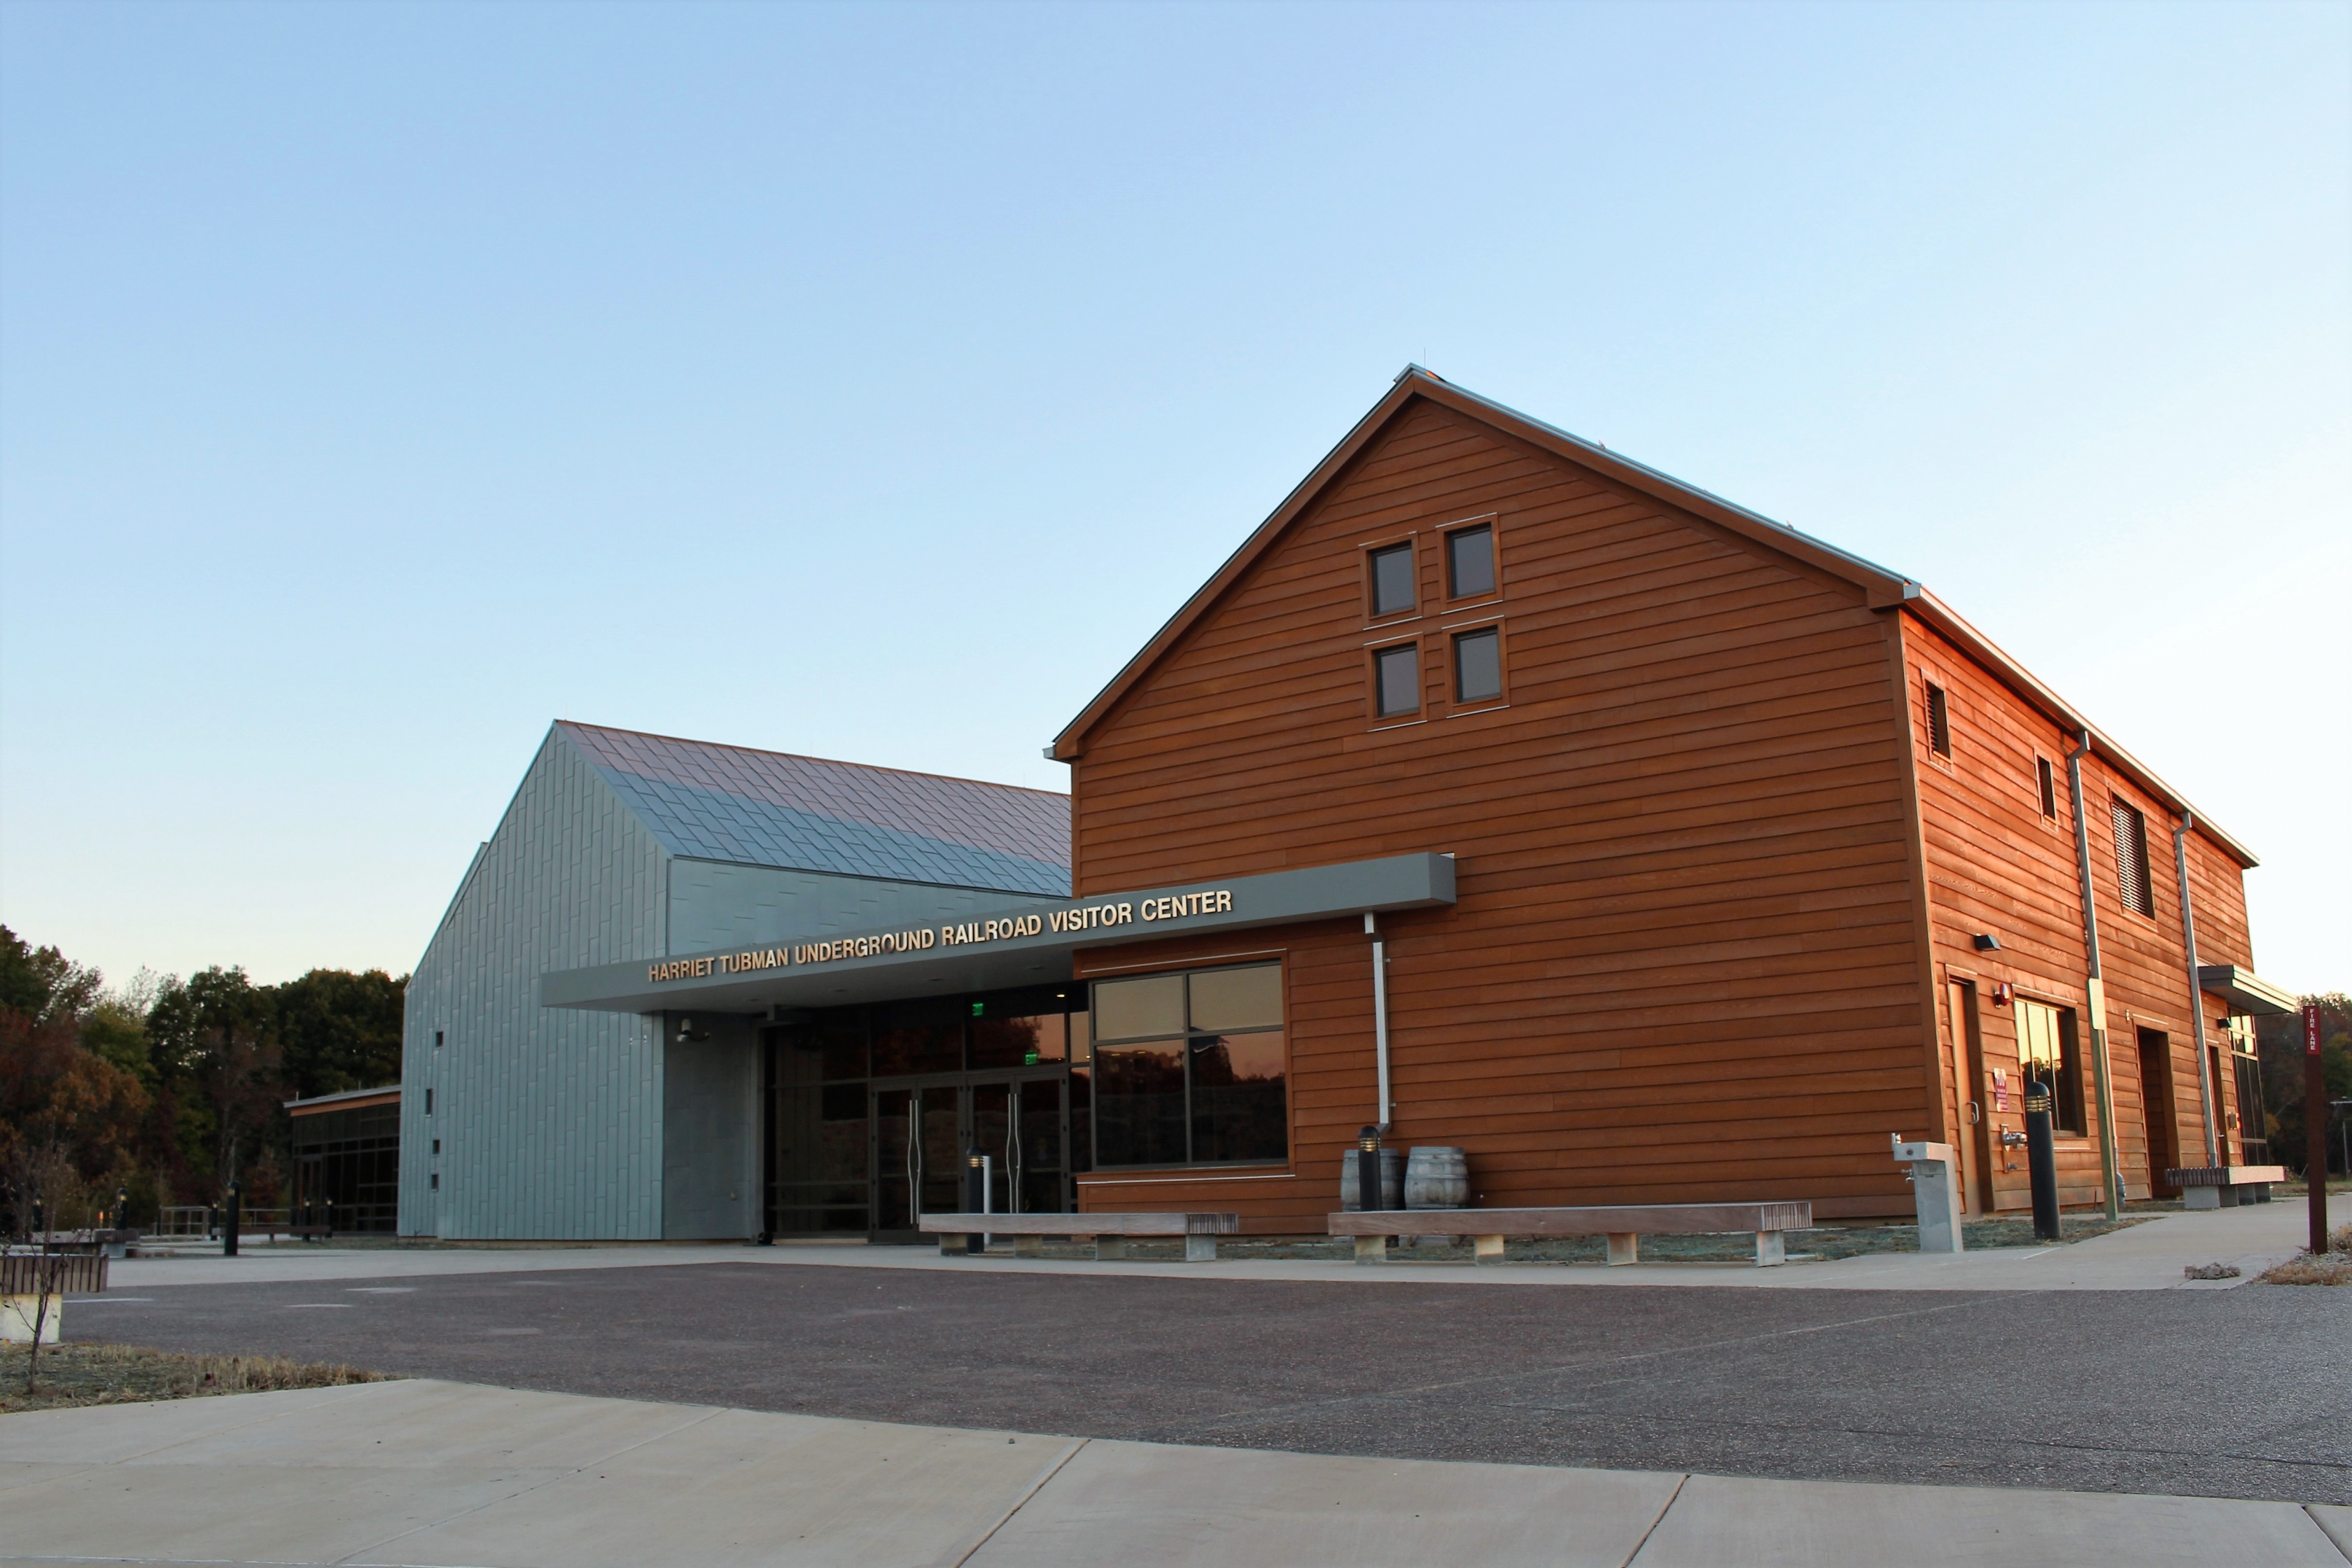 Front view of the visitor center, with two barn-like fronts visible, one in orange wood panel and one in metallic gray.